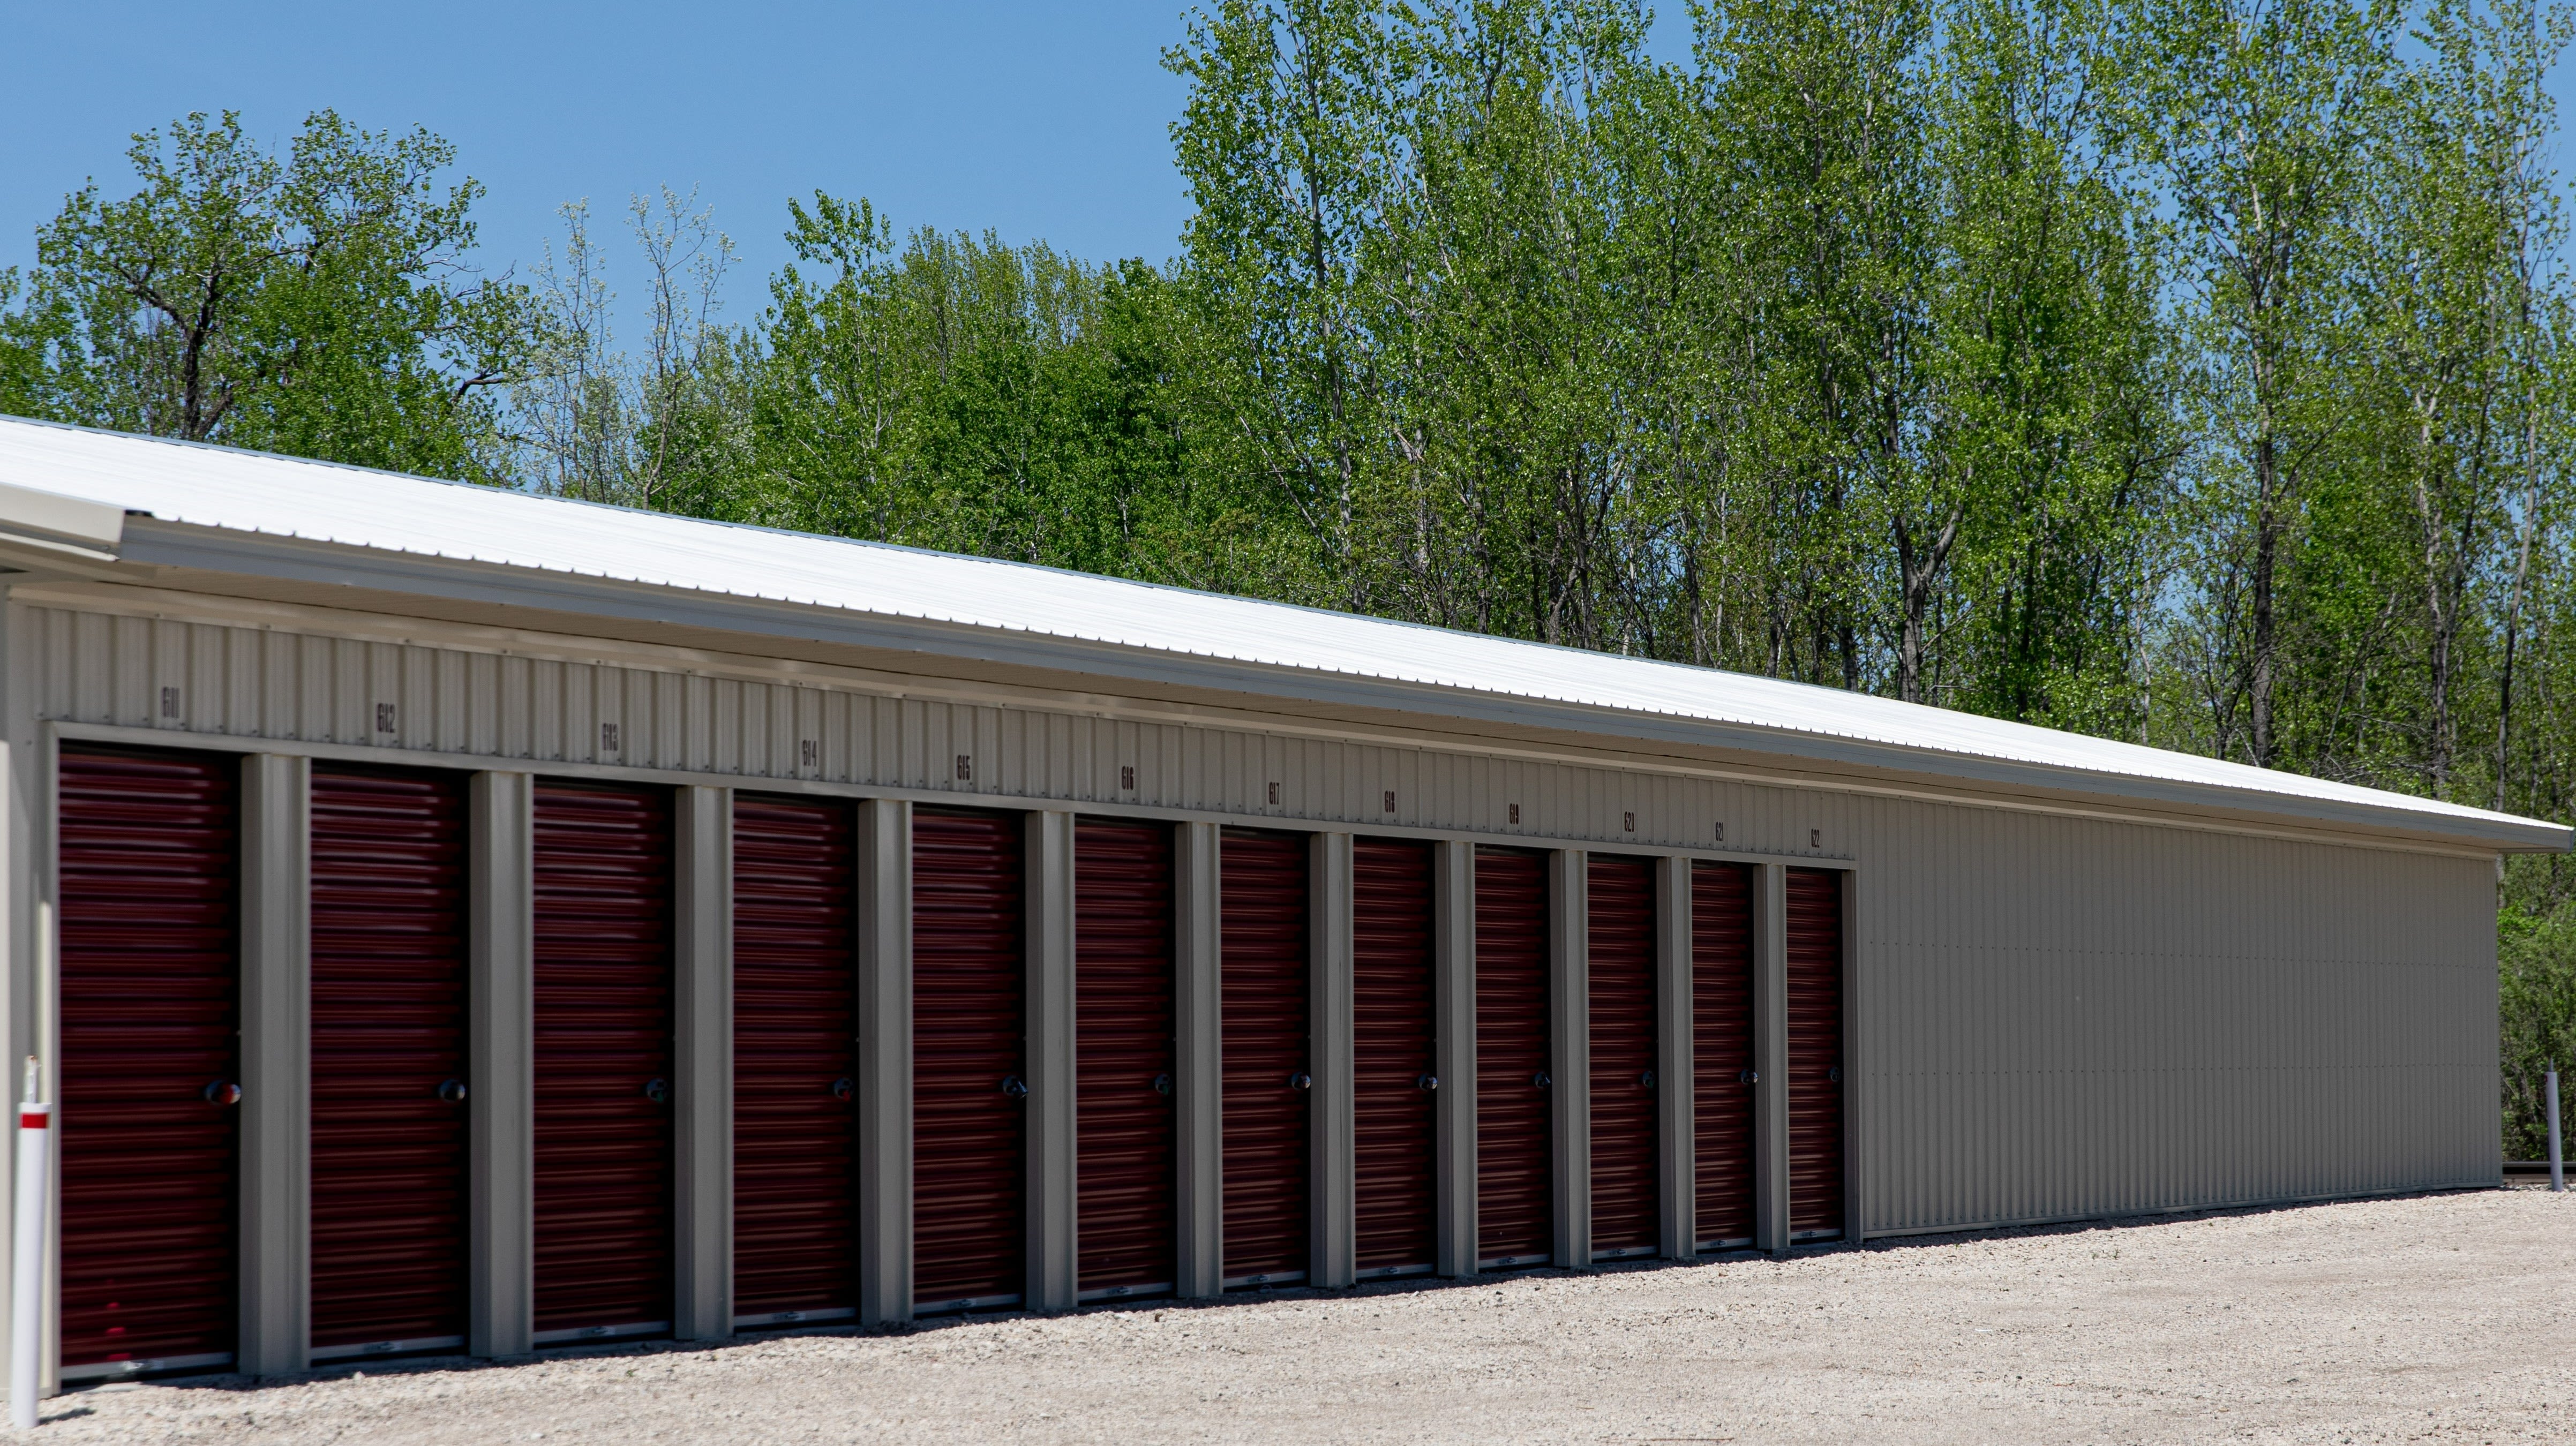 Learn more about features at KO Storage of Tomah - Washington in Tomah, Wisconsin